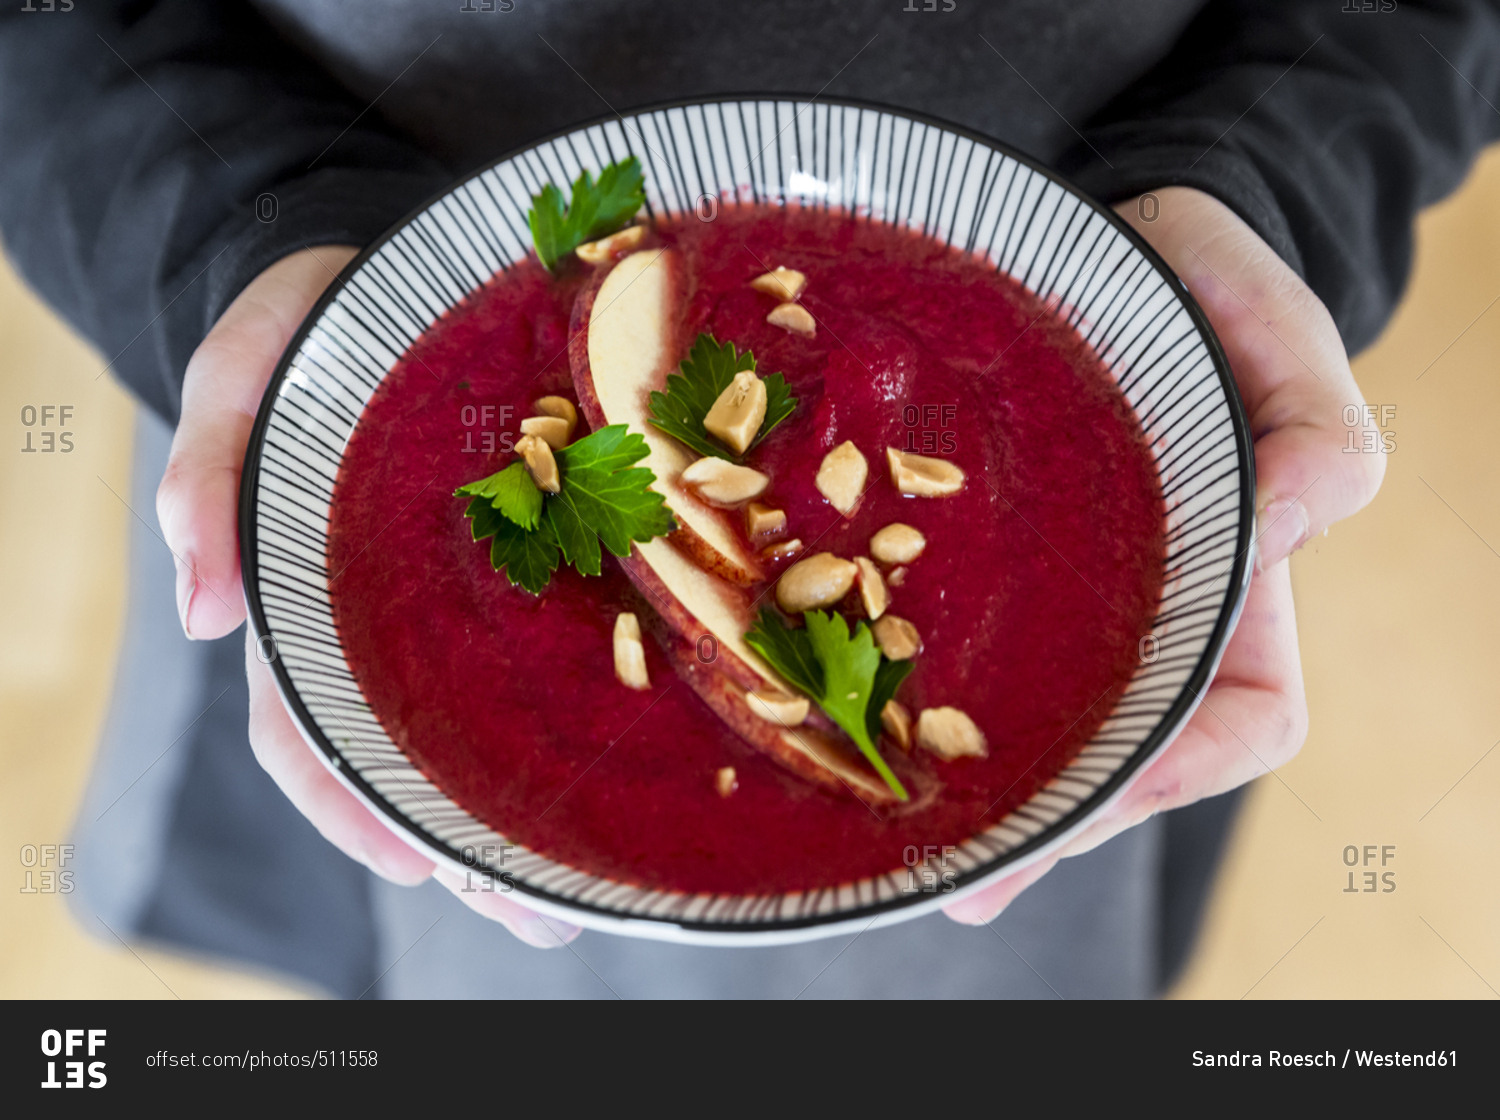 Girl\'s hands holding bowl of beetroot soup garnished with apple slices- peanuts and flat leaf parsley